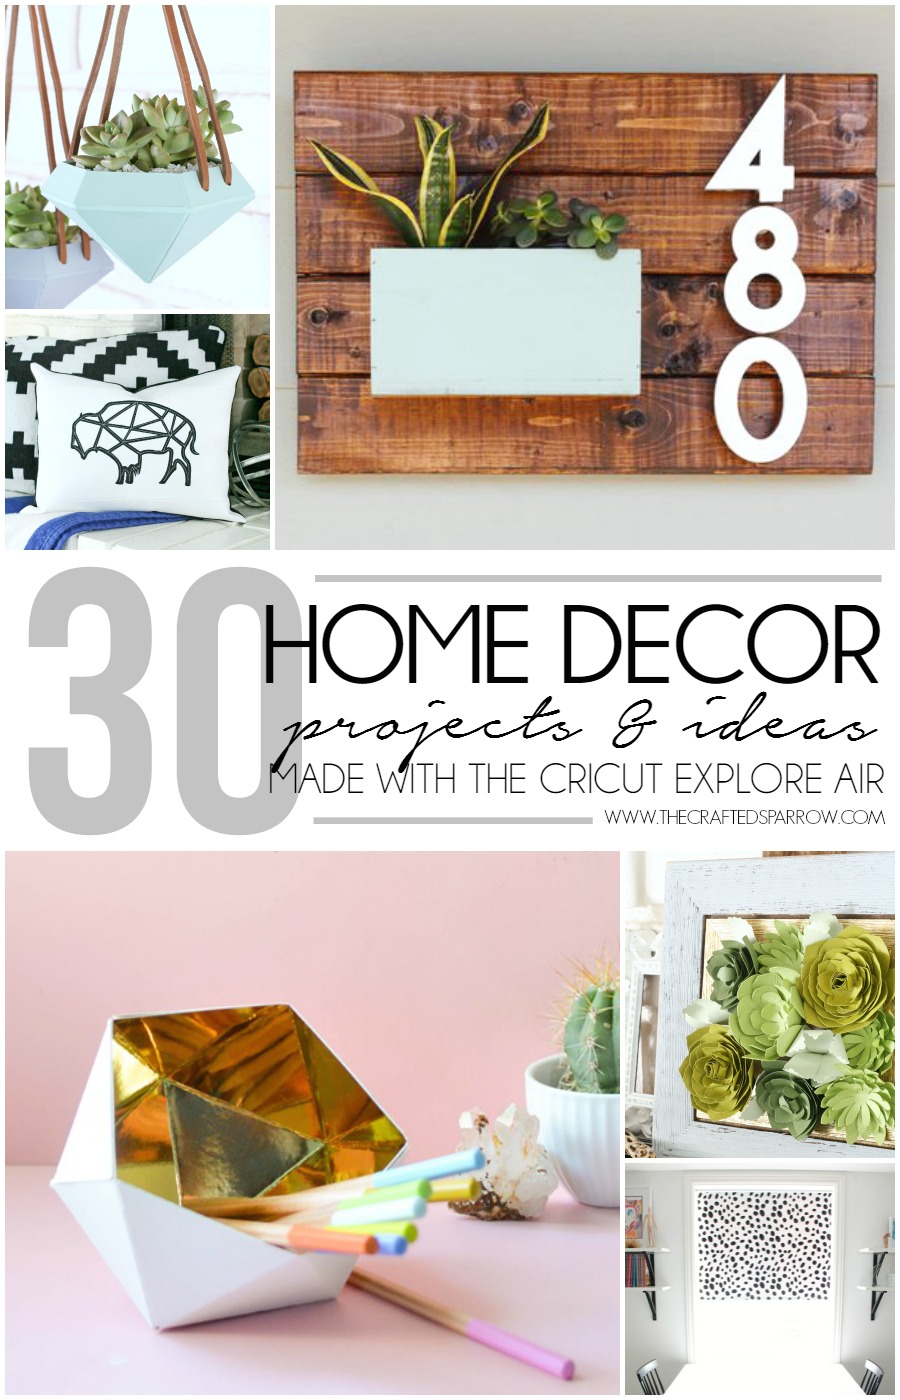 30 Home Decor Projects Made with the Cricut Explore Air